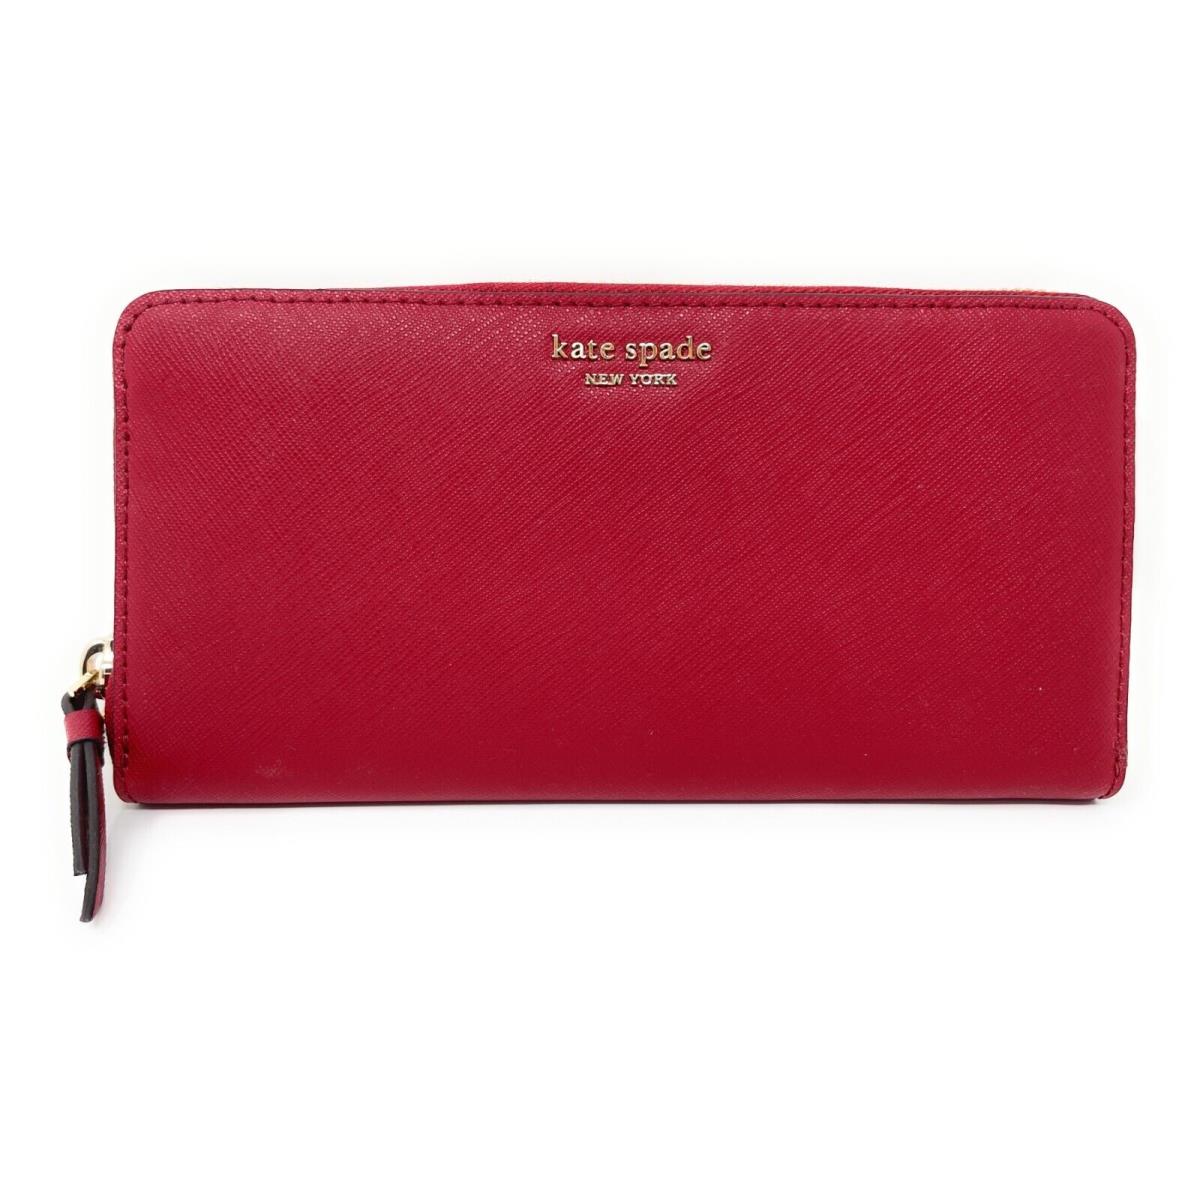 Kate Spade New York Cameron LG Continental Leather Wallet in Rosso Red